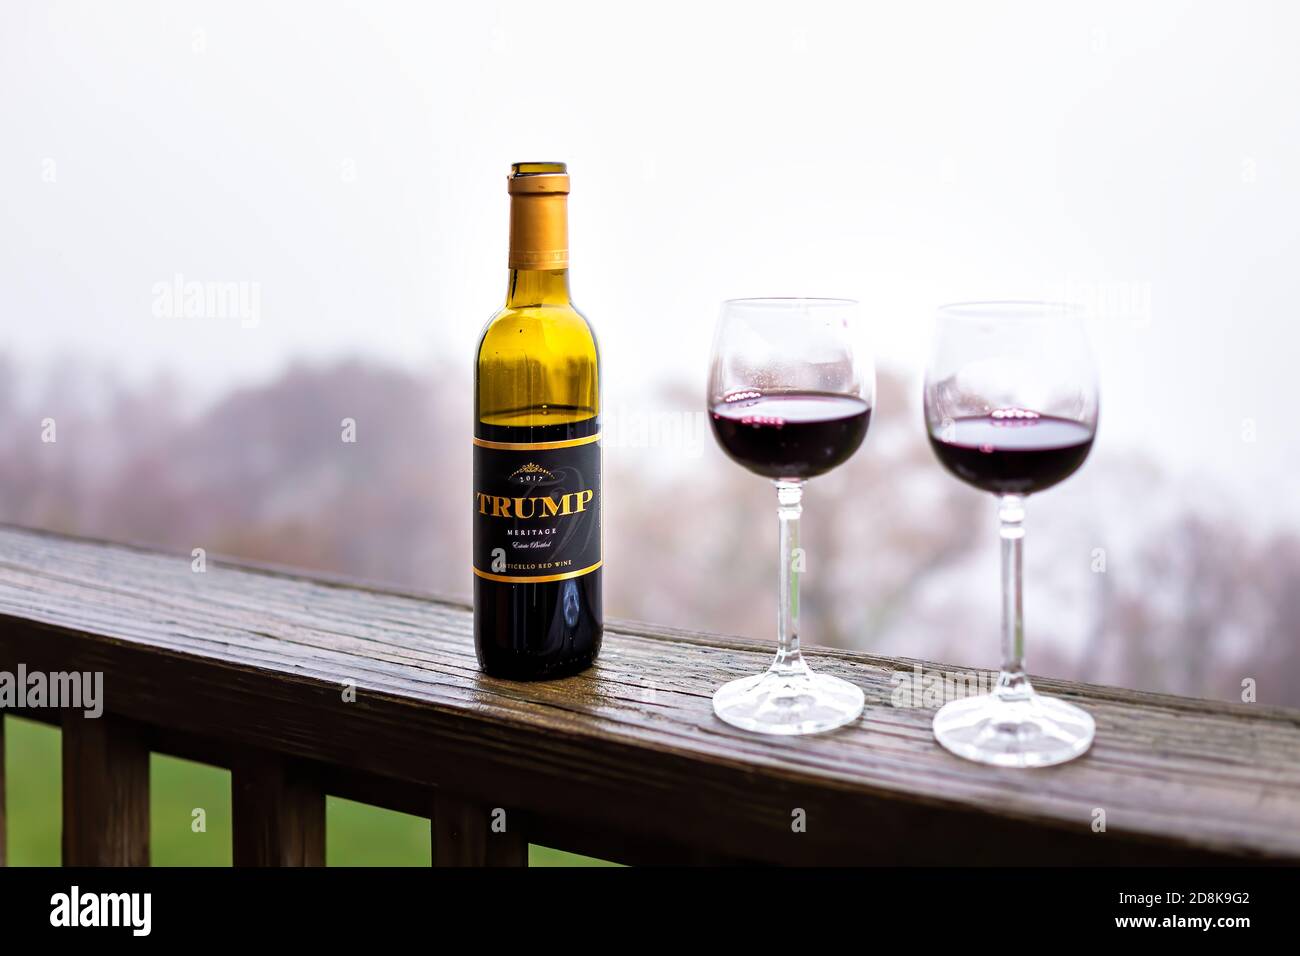 Roseland, Virginia - October 25, 2020: Closeup of Meritage red wine bottle with sign label text for Trump from famous winery in Virginia with empty gl Stock Photo